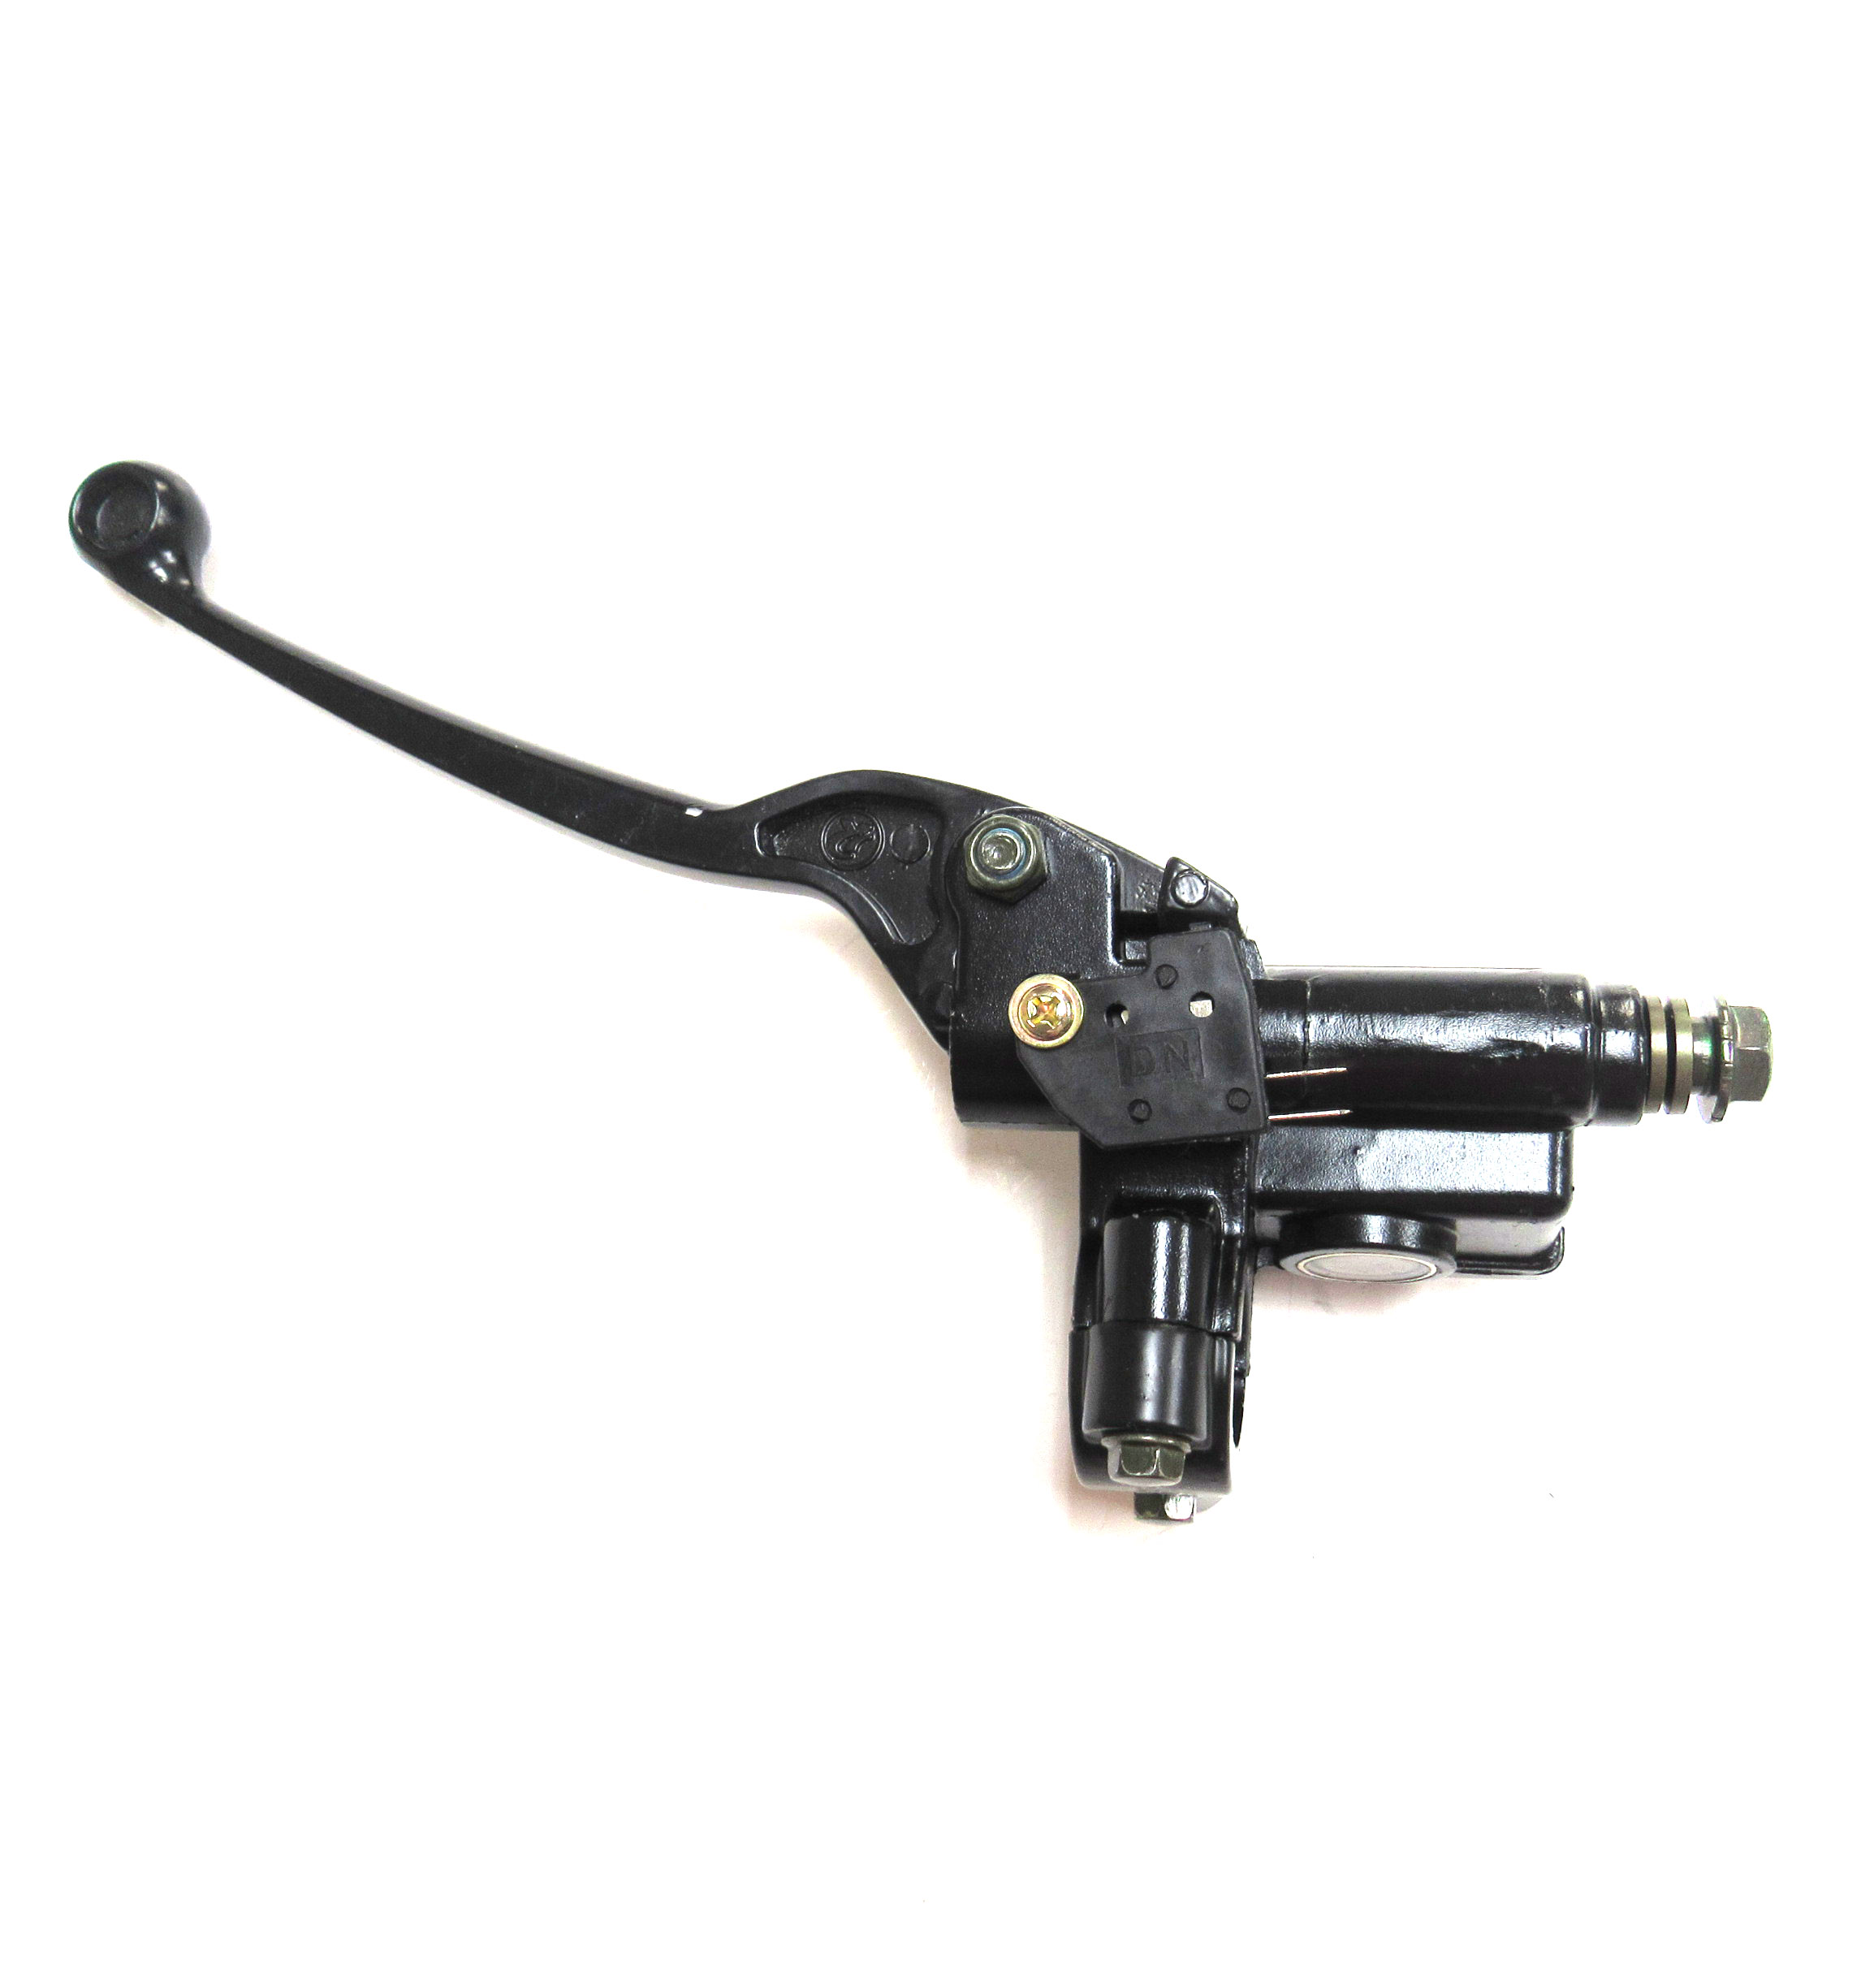 RIGHT SIDE FRONT BRAKE LEVER & MASTER CYLINDER w/8mm MIRROR MOUNT Fits Many 49-150cc Scooters